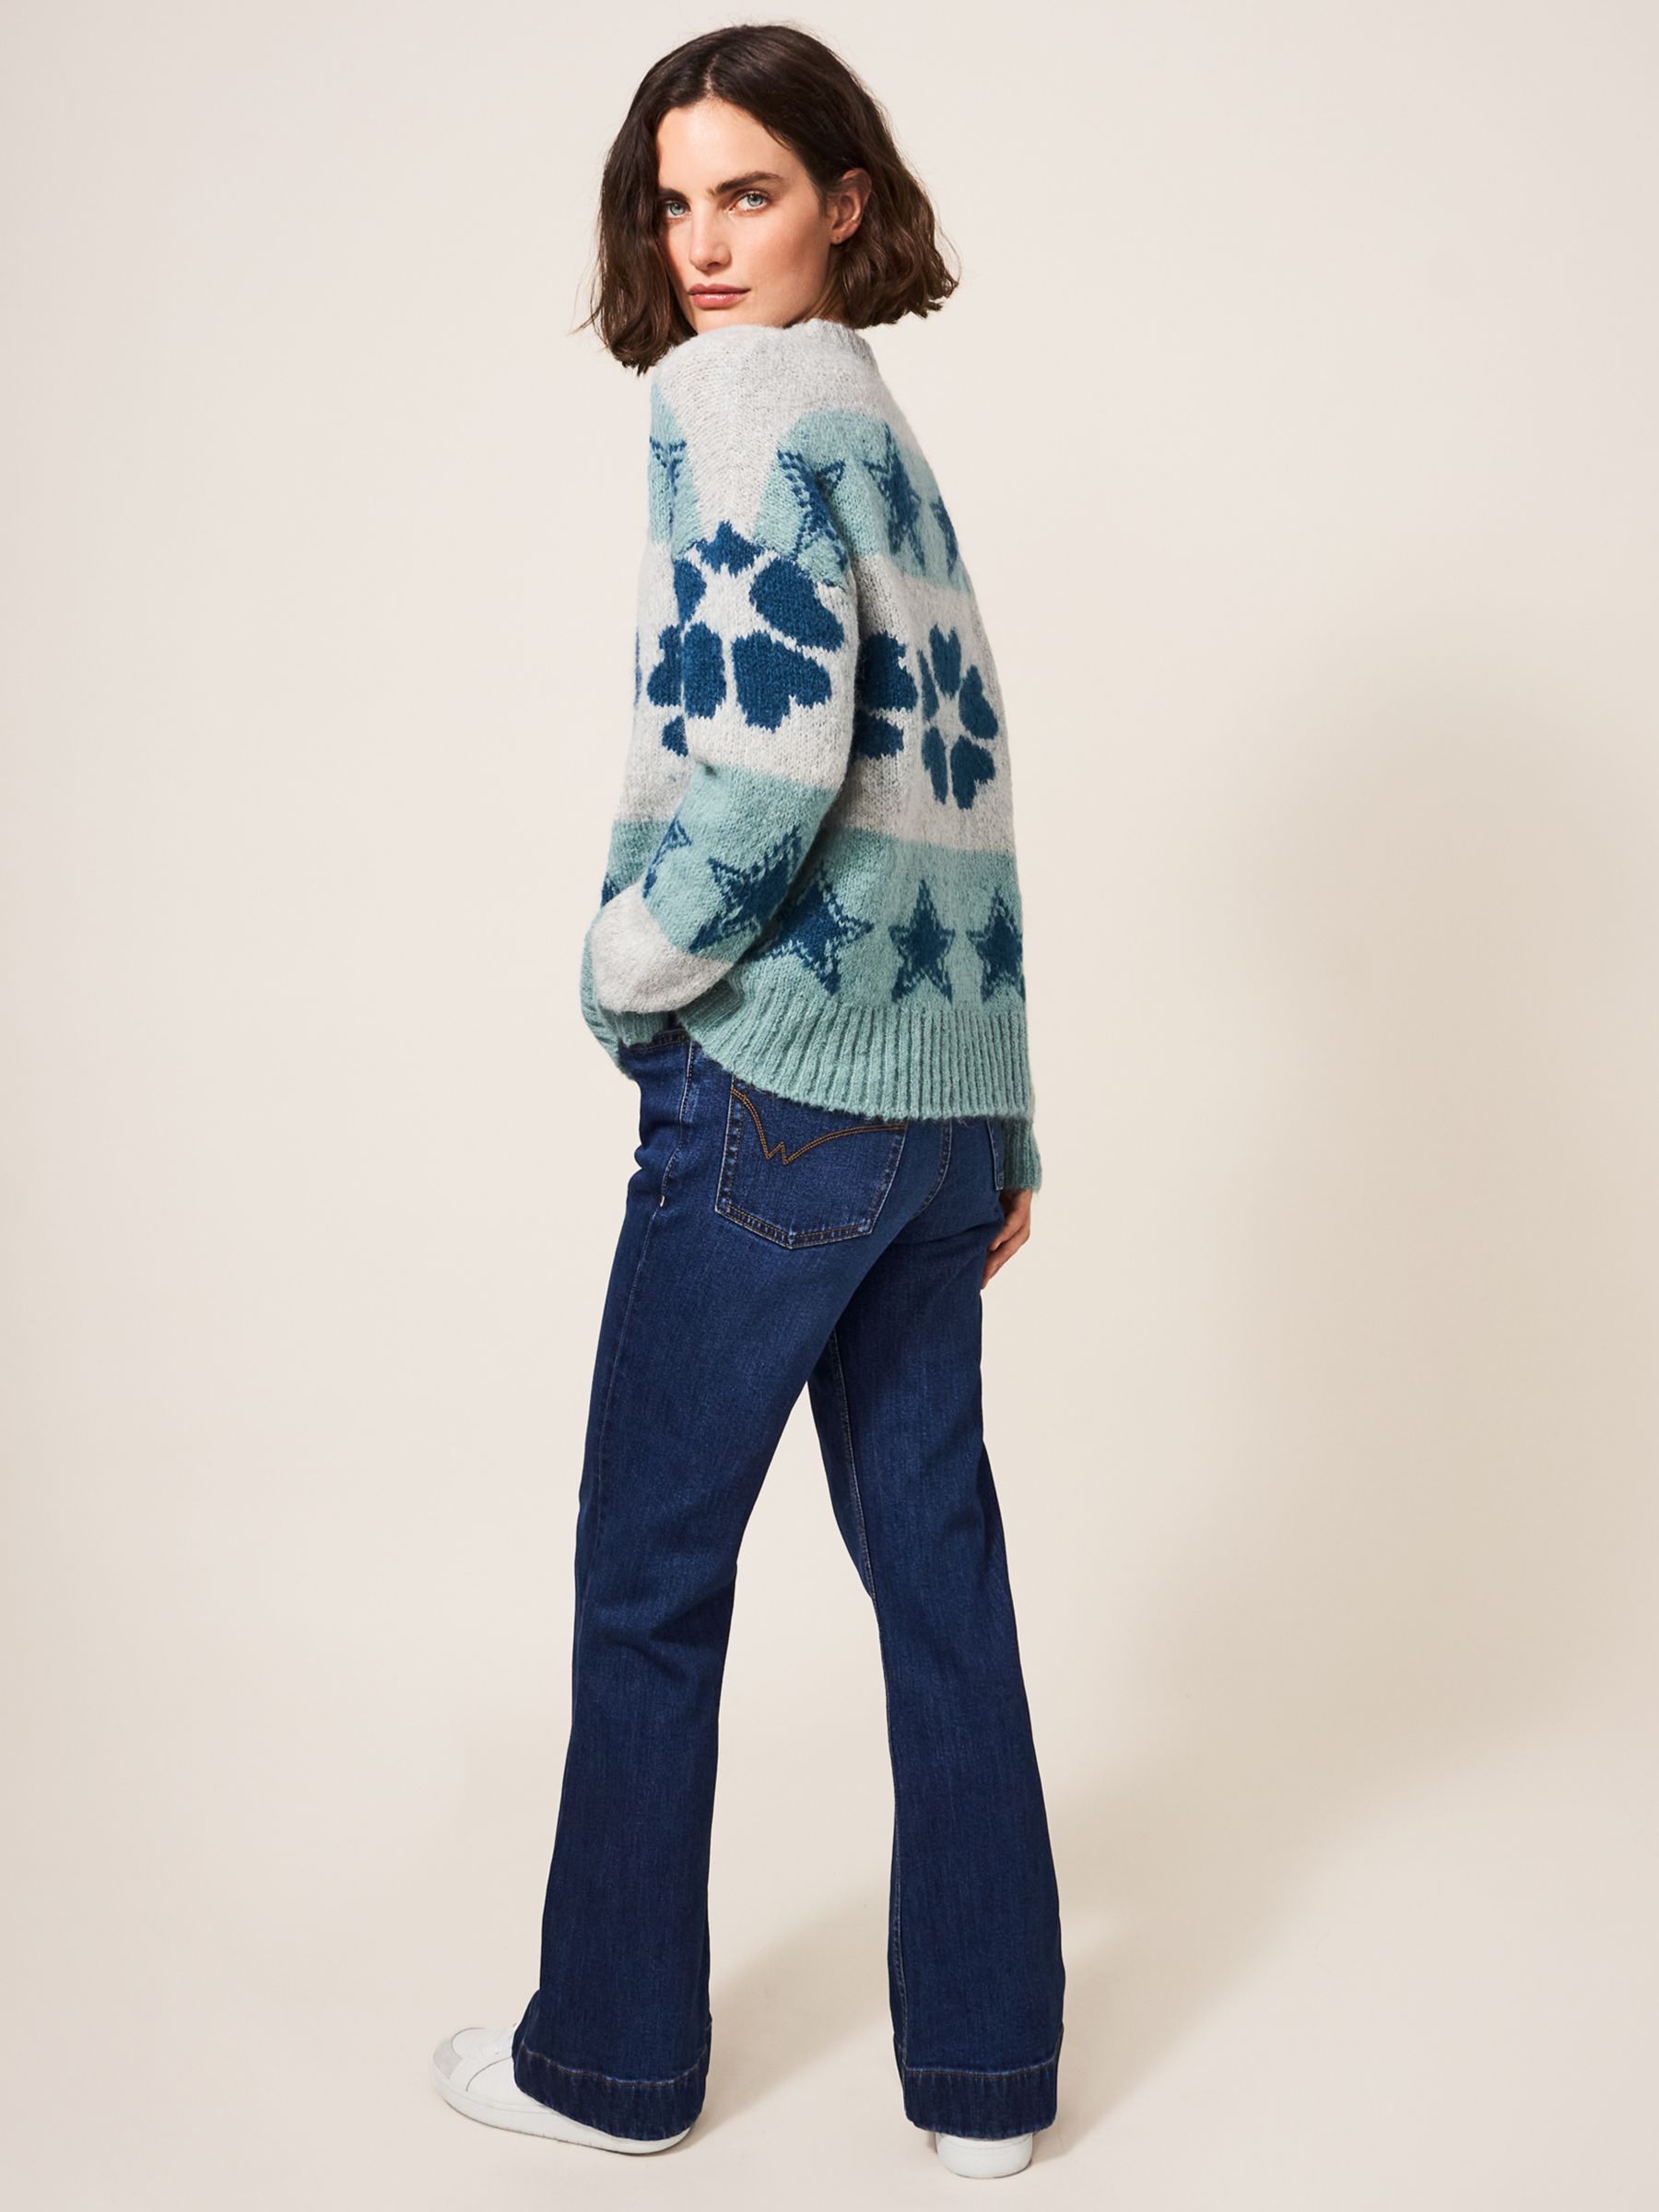 White Stuff Star and Flower Print Wool Blend Knitted Jumper, Teal/Multi ...